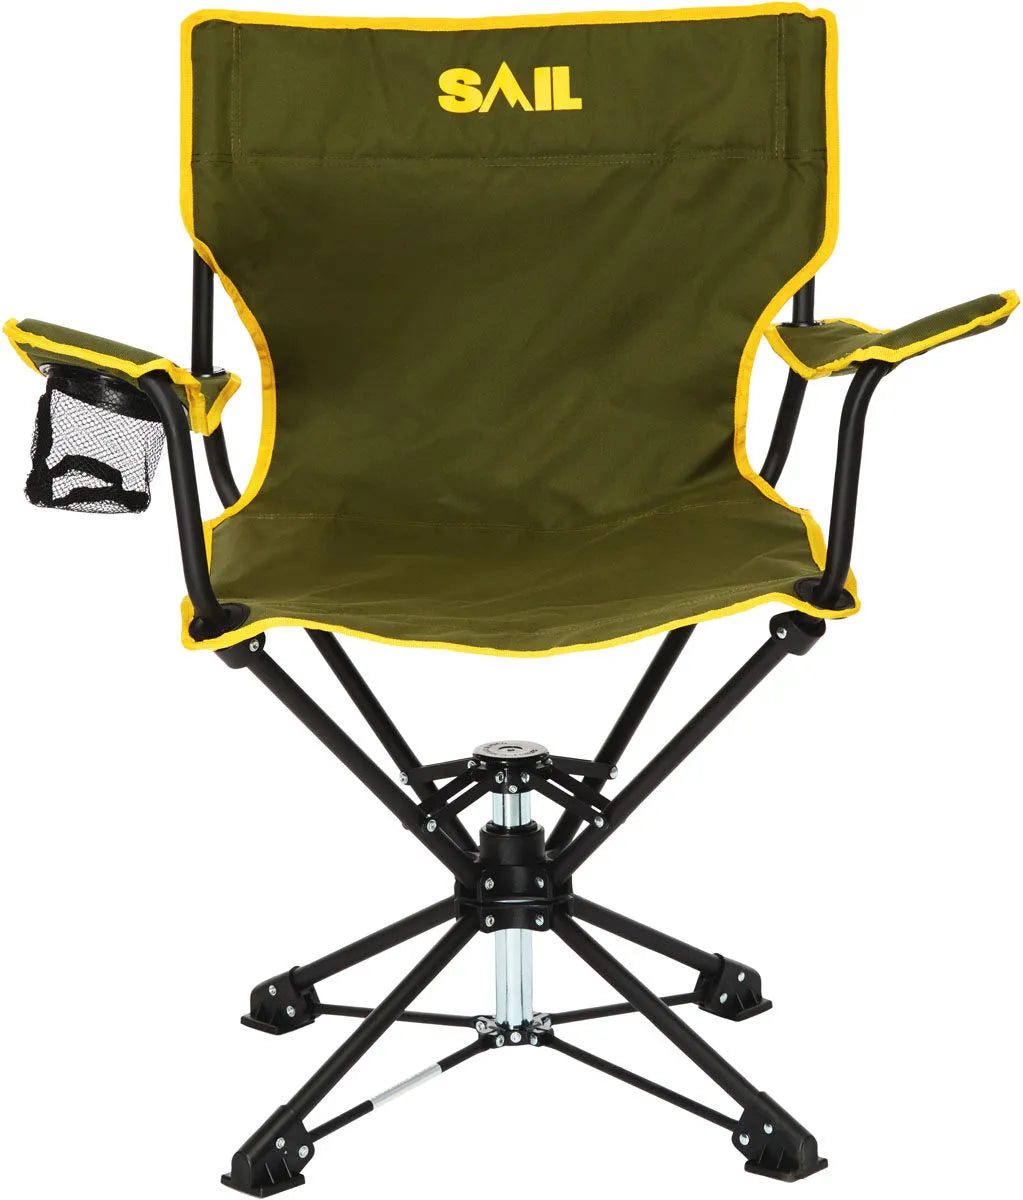 360-Degree Swivel Camping Chair